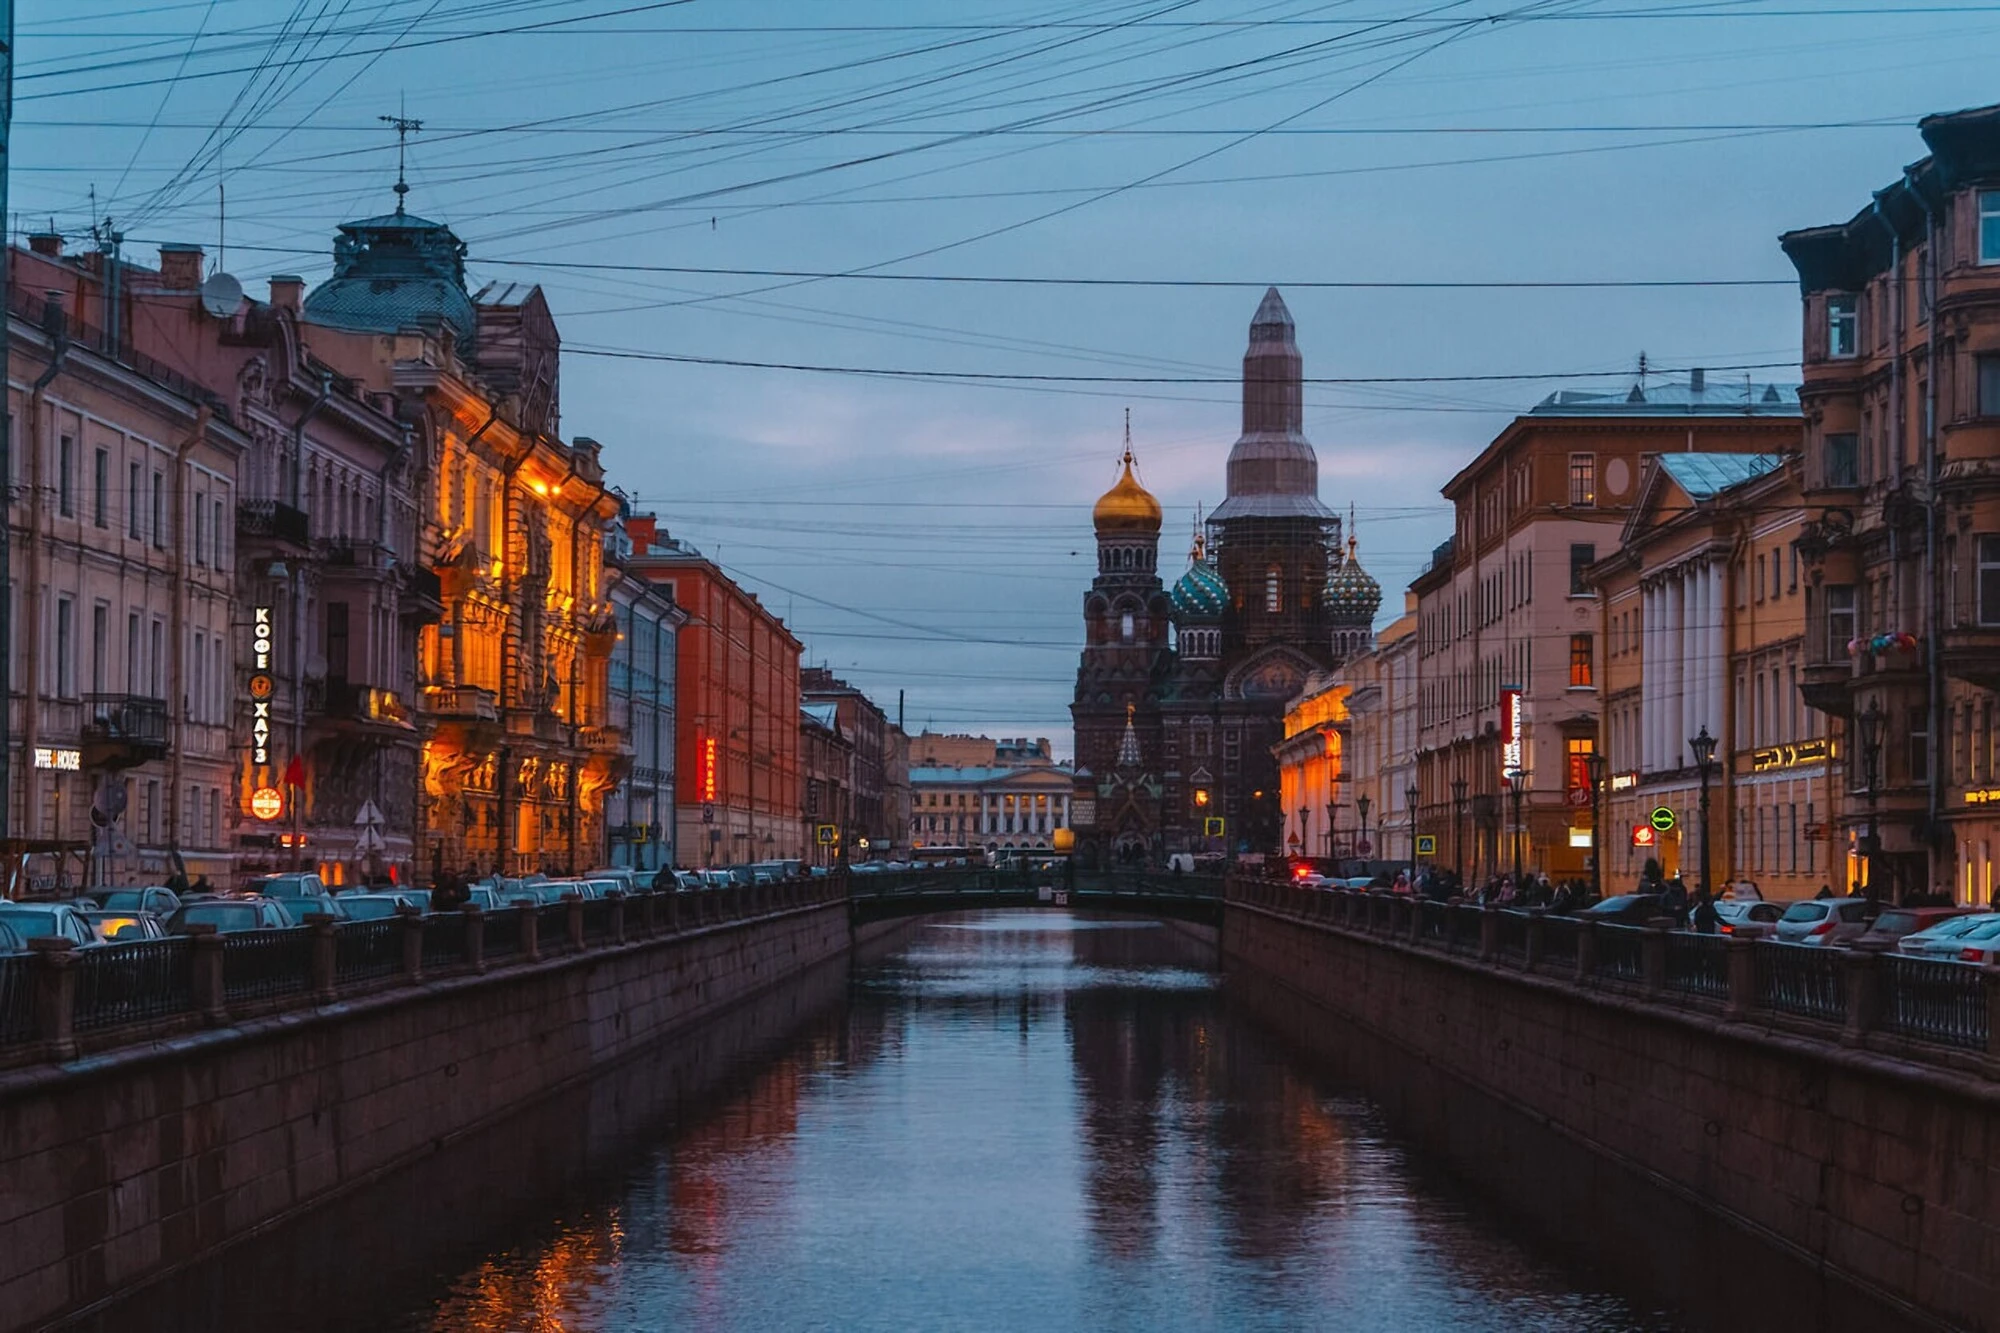 3 Days in Saint Petersburg, Russia - A Complete Guide to Backpacking Saint Petersburg